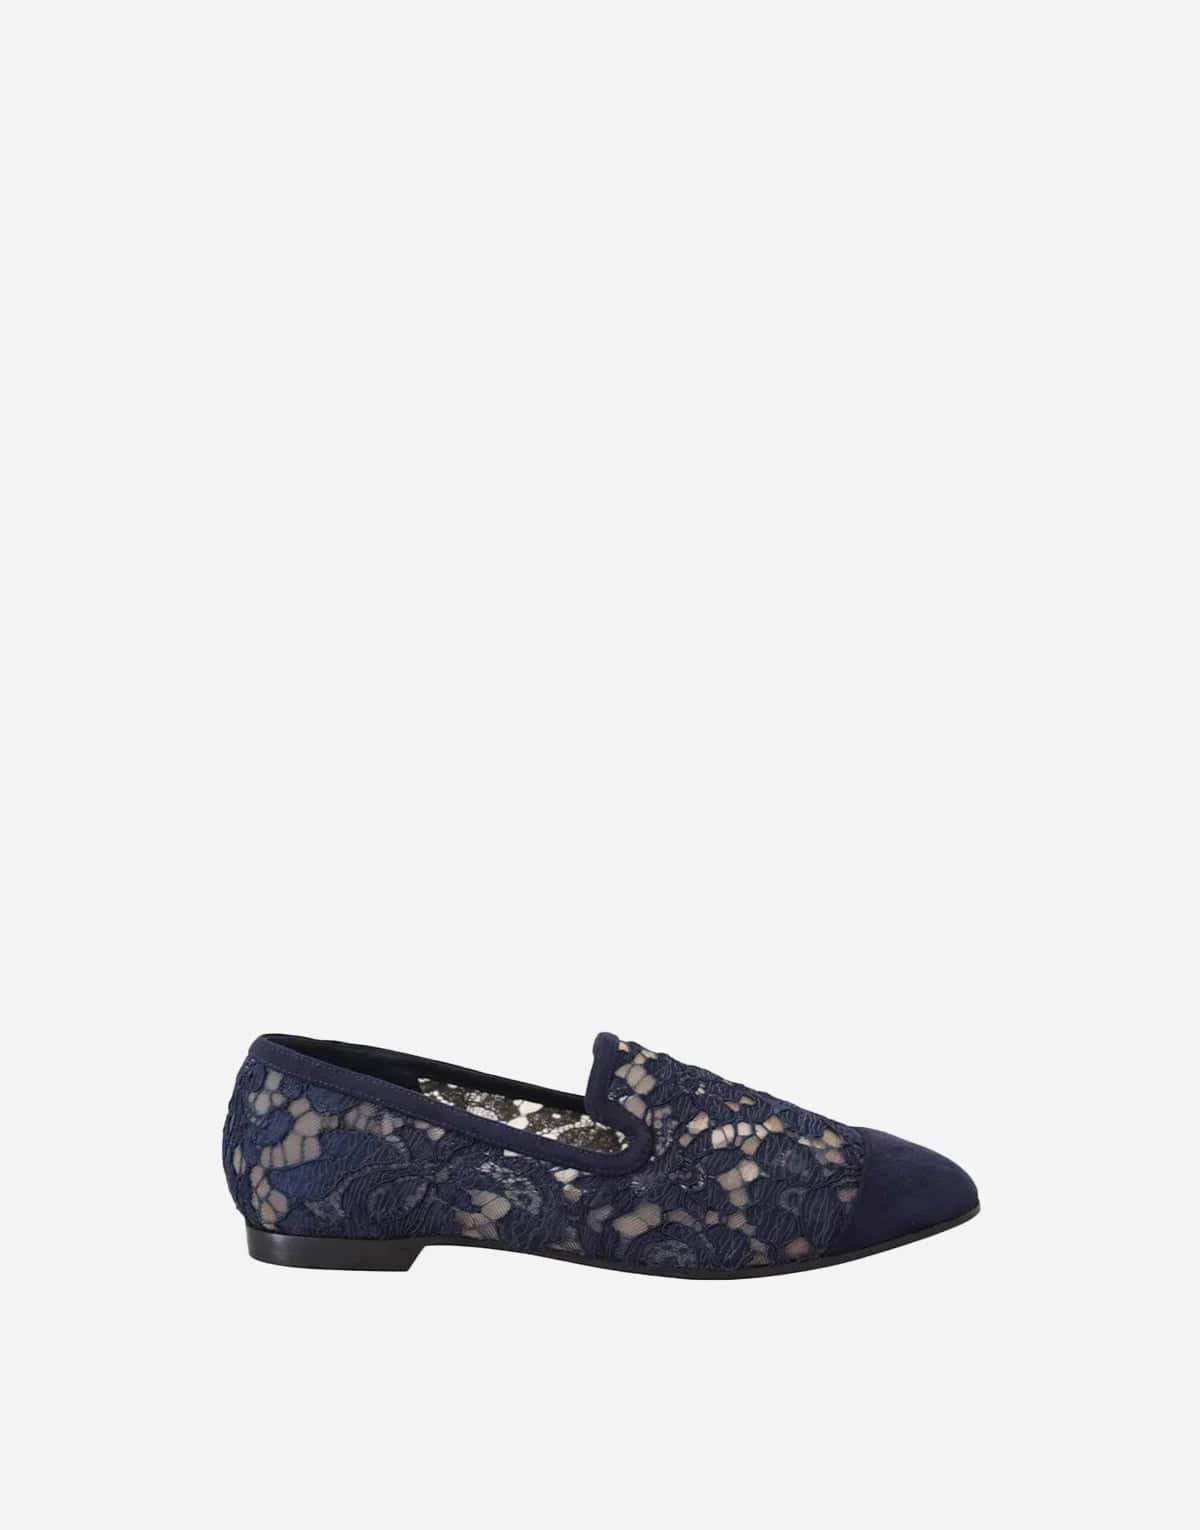 Dolce & Gabbana Floral Lace Loafers